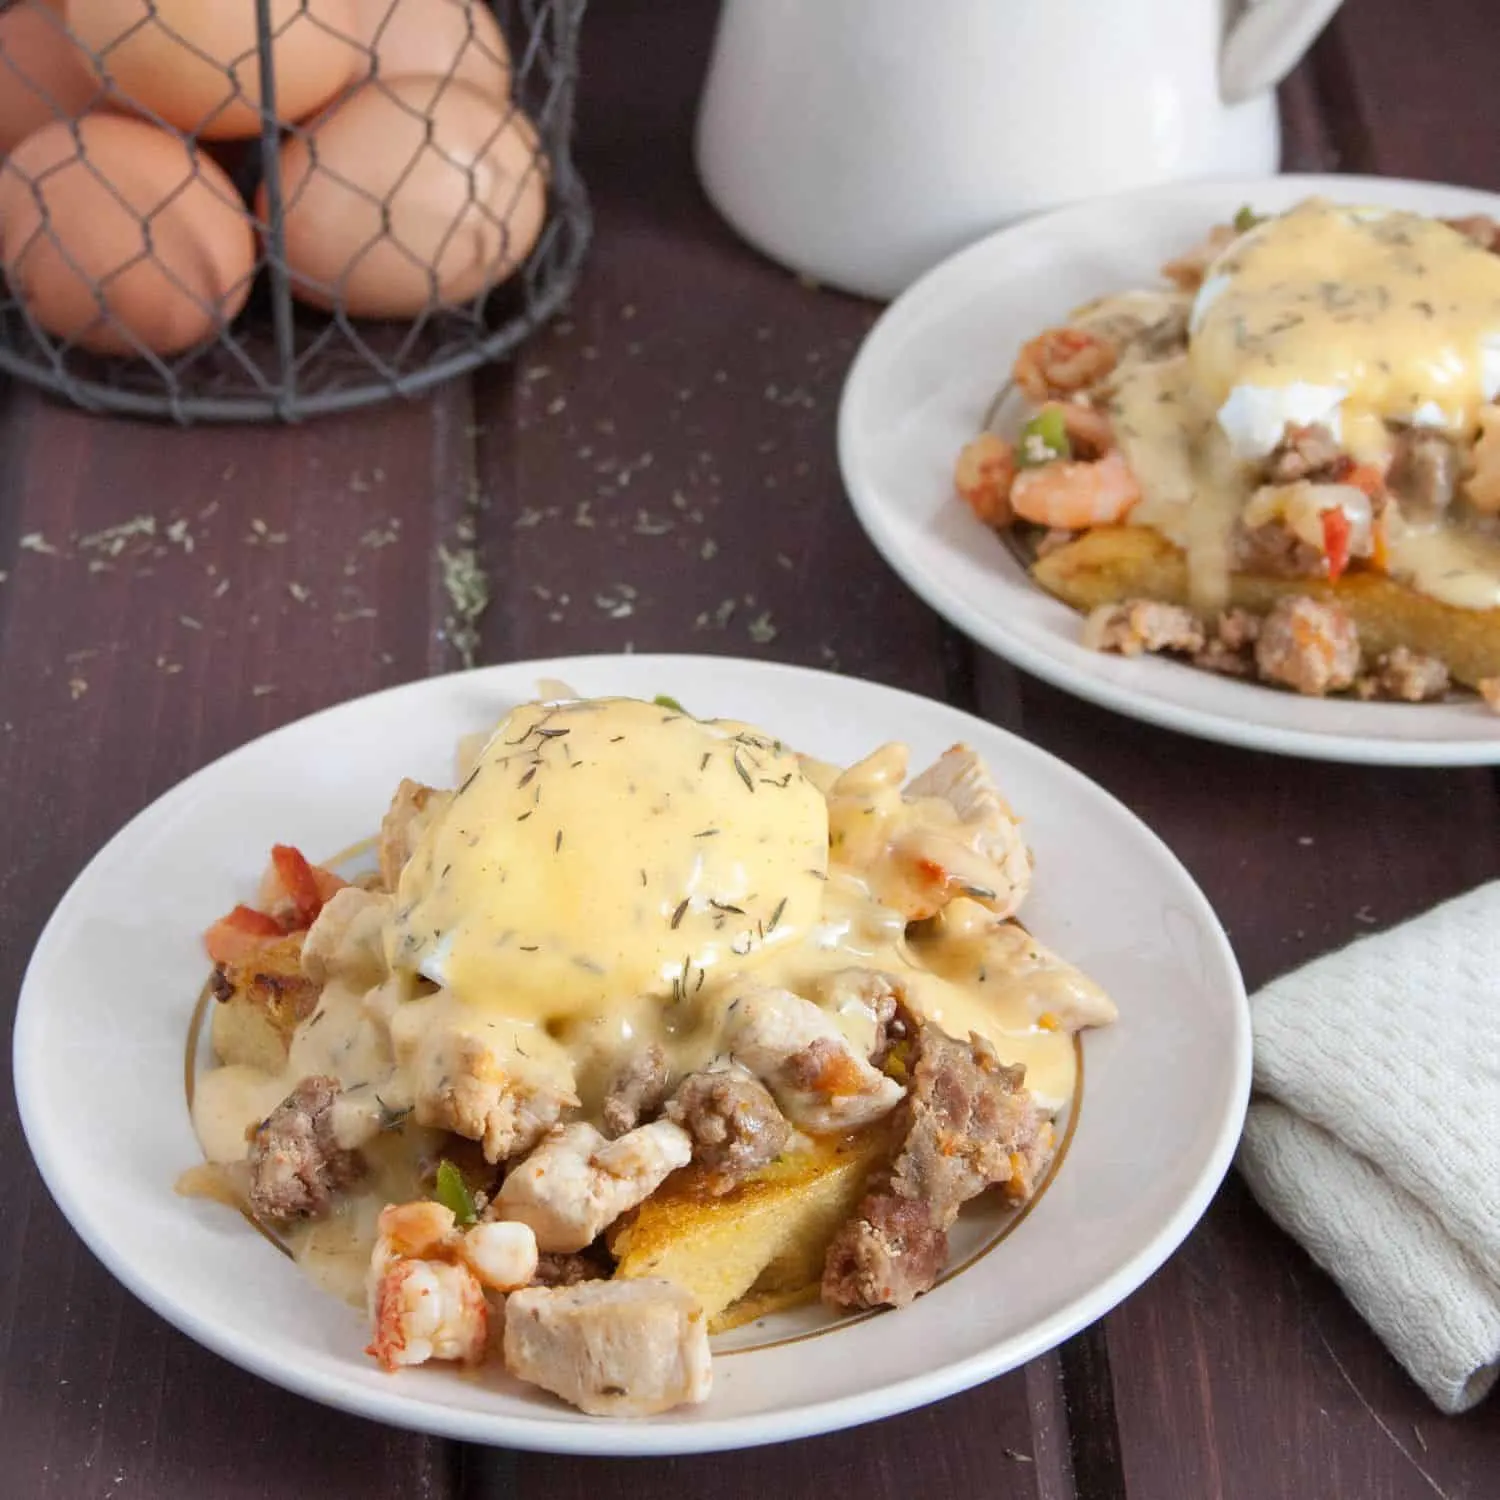 Add a New Orleans inspired twist to breakfast with Cajun Eggs Benedict!